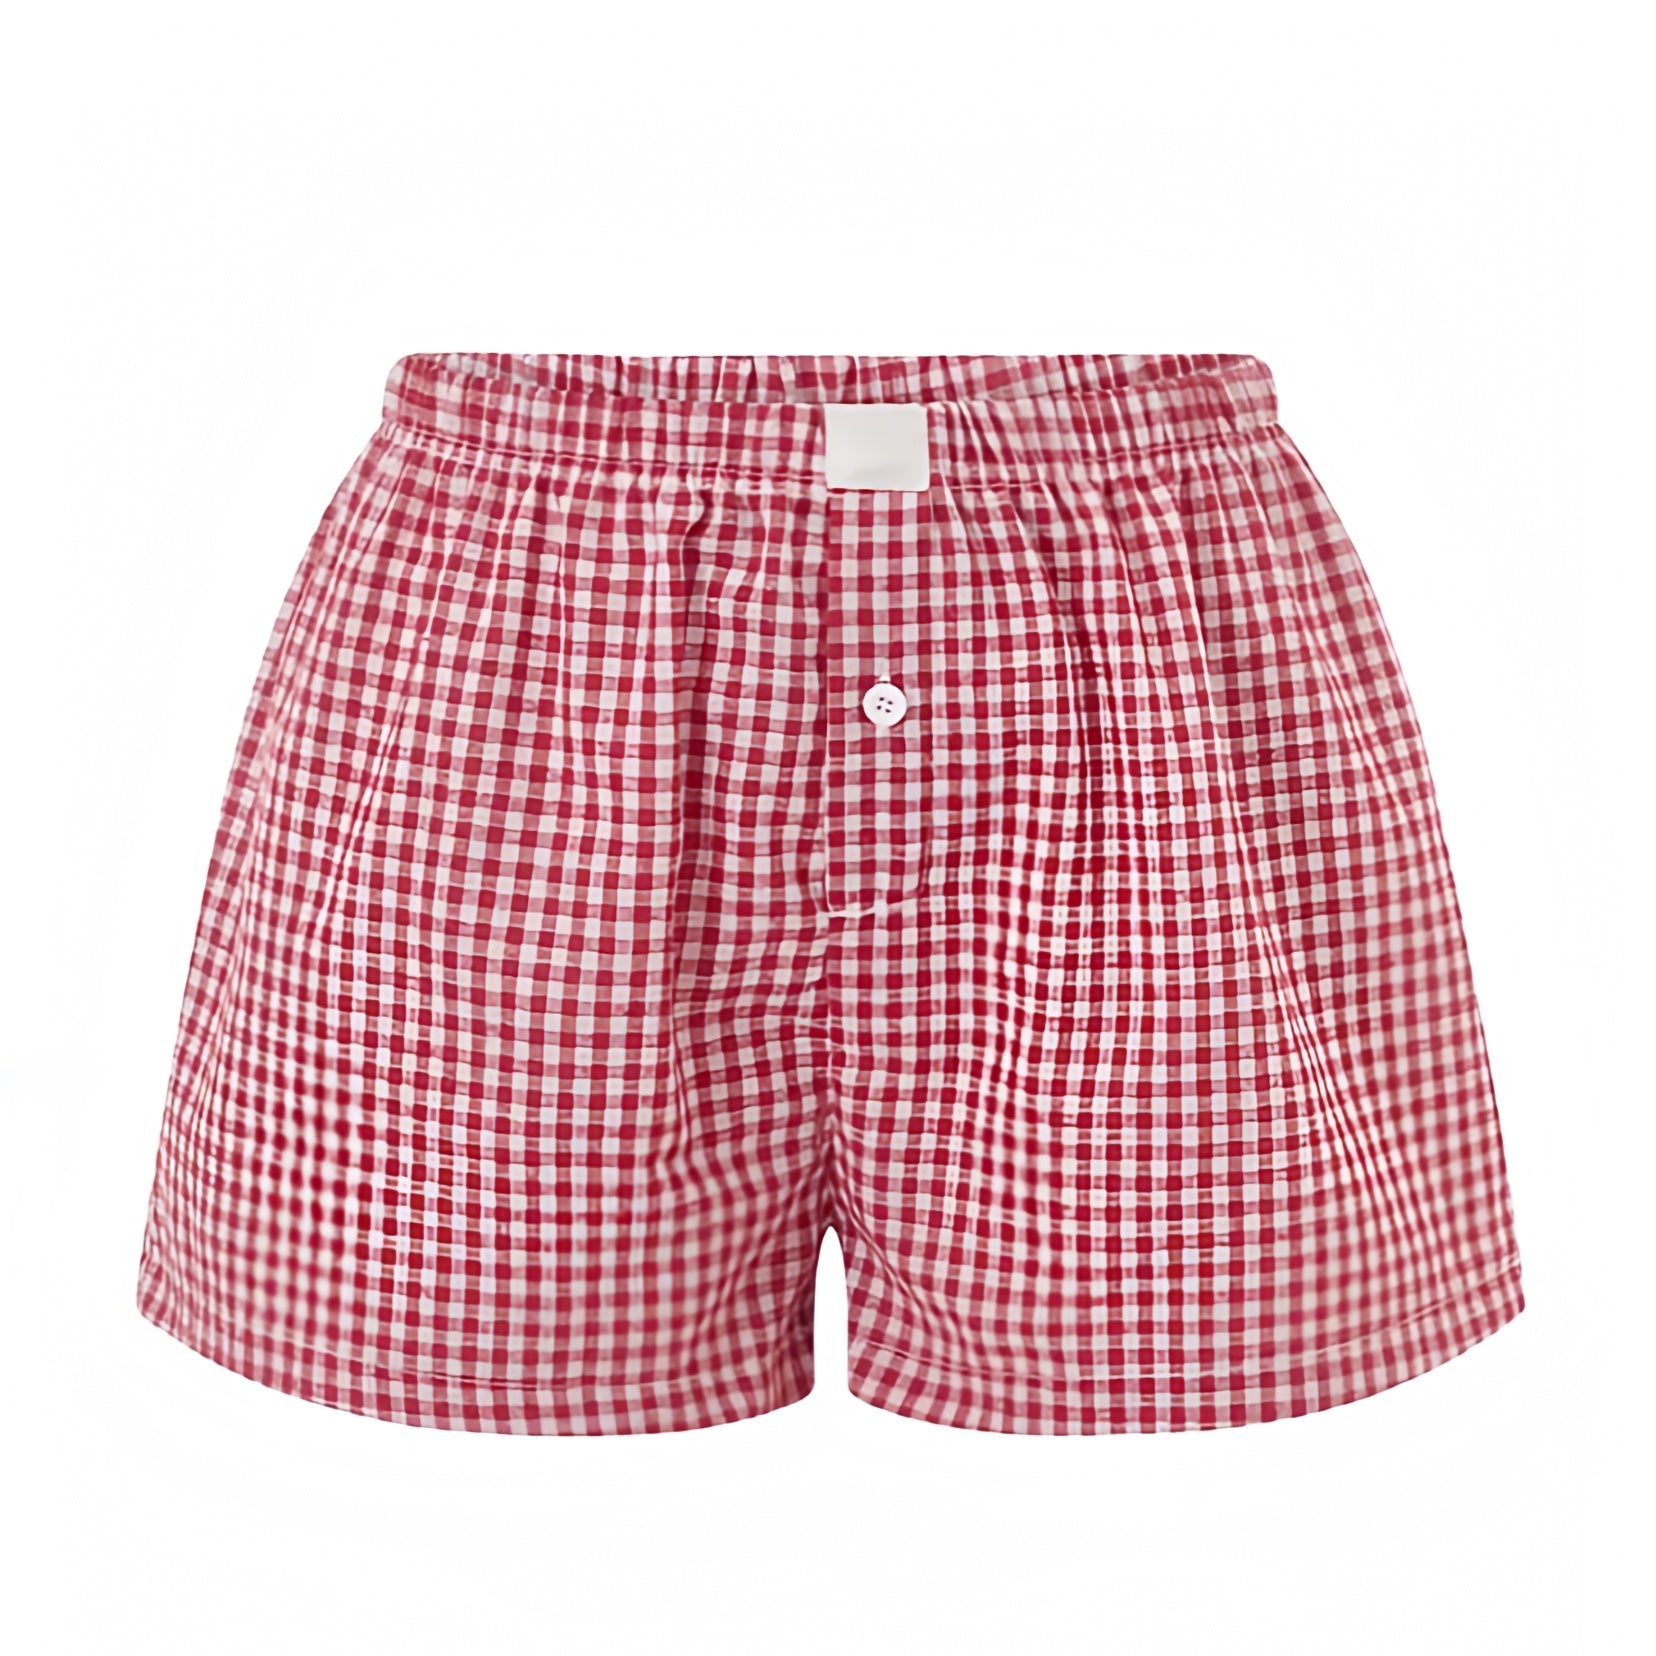 red-and-white-gingham-checkered-plaid-striped-patterned-linen-cotton-light-weight-mid-low-rise-waisted-button-down-fitted-waist-sweat-short-mini-shorts-comfy-cozy-lounge-attire-women-ladies-chic-trendy-spring-2024-summer-casual-feminine-beach-wear-preppy-style-brandy-melville